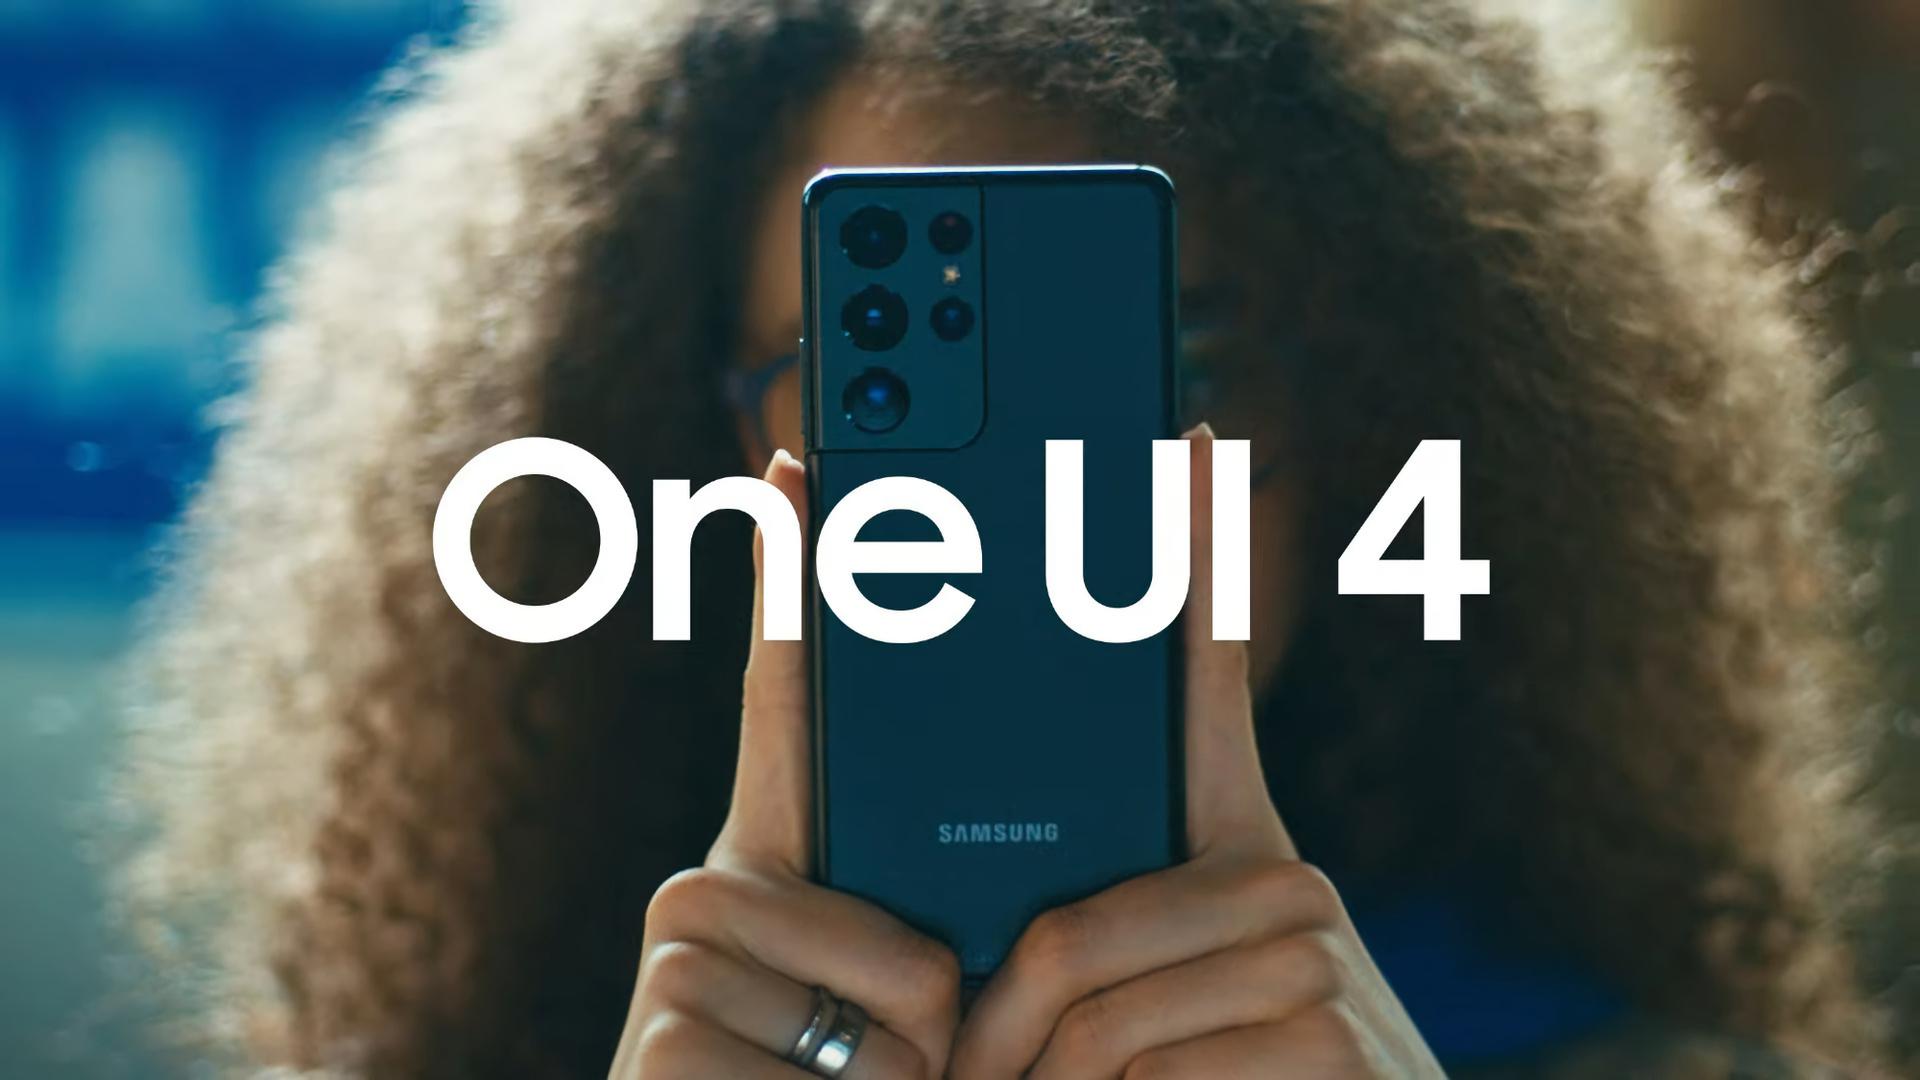 Samsung's flagships will soon get a stable One UI 4.0 on Android 12 - firmware testing is over